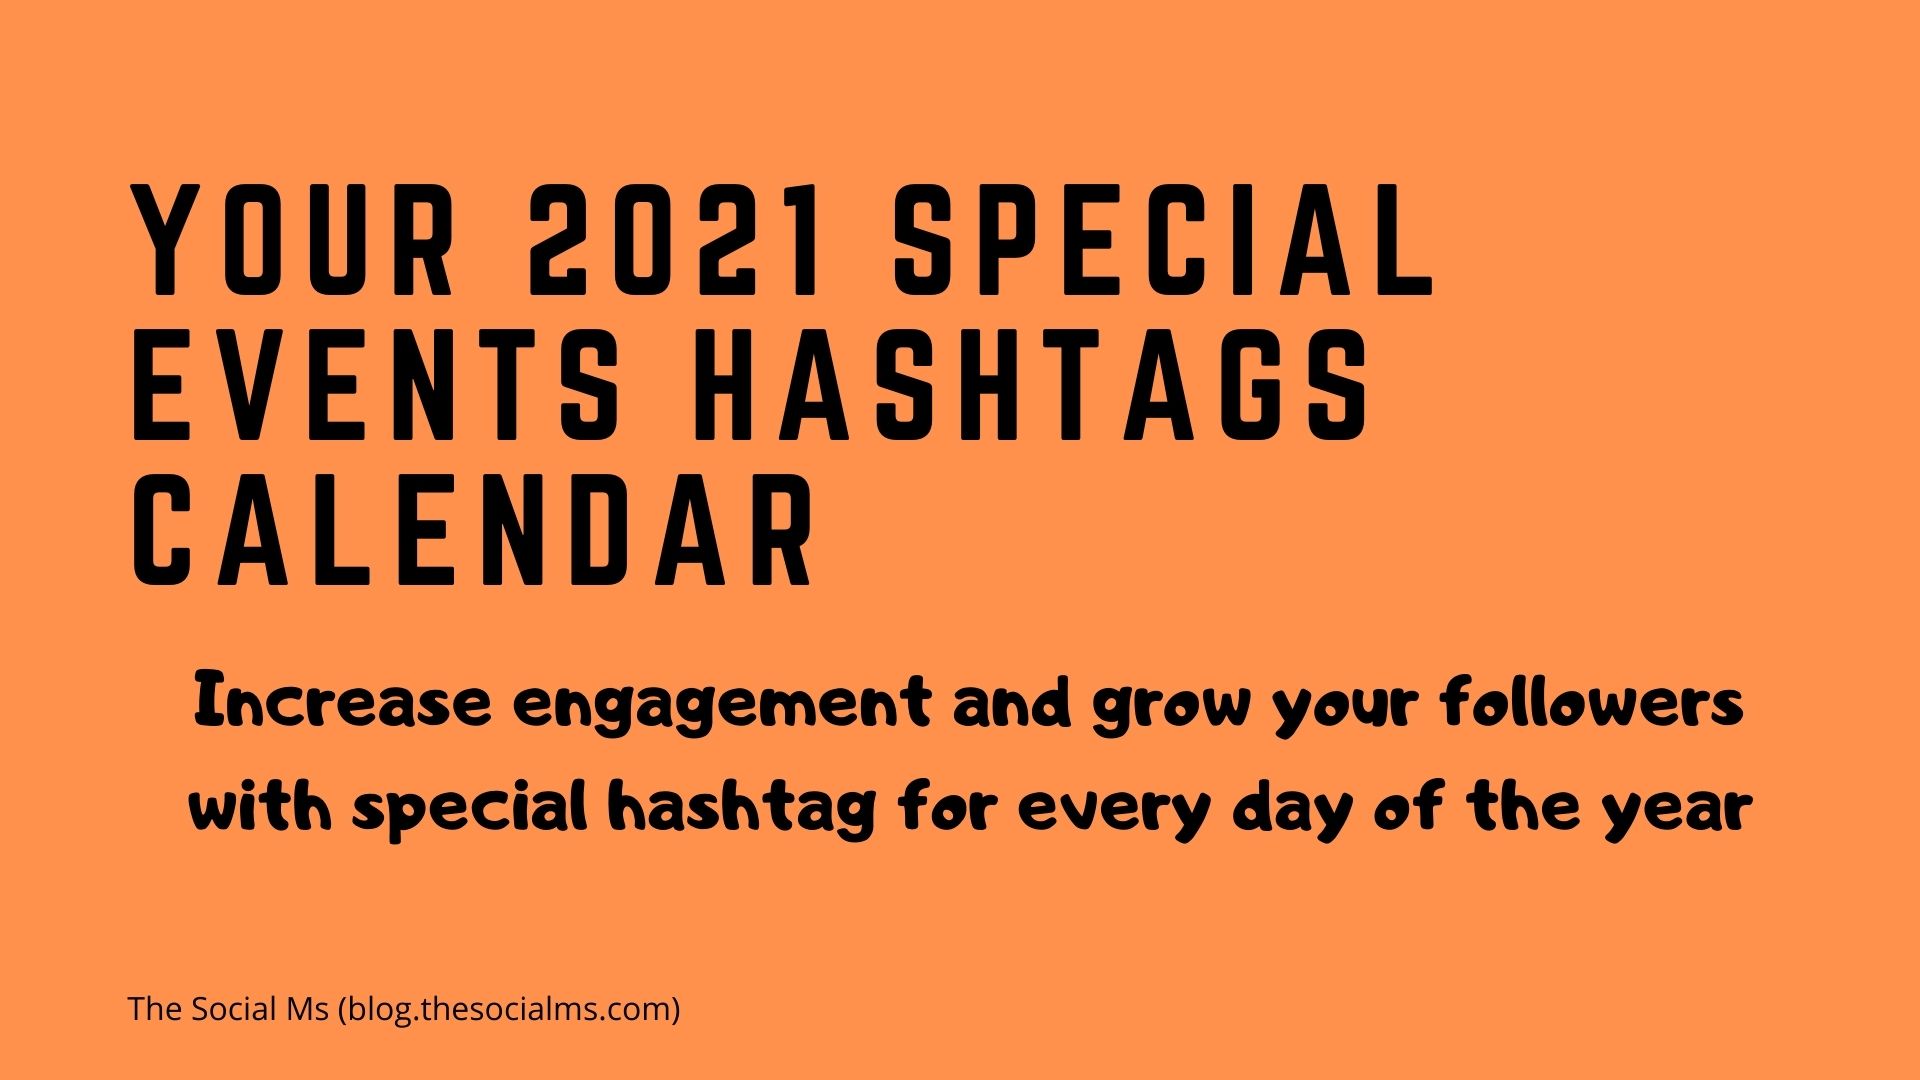 Get your free Instagram Hashtag Calendar The Social Ms